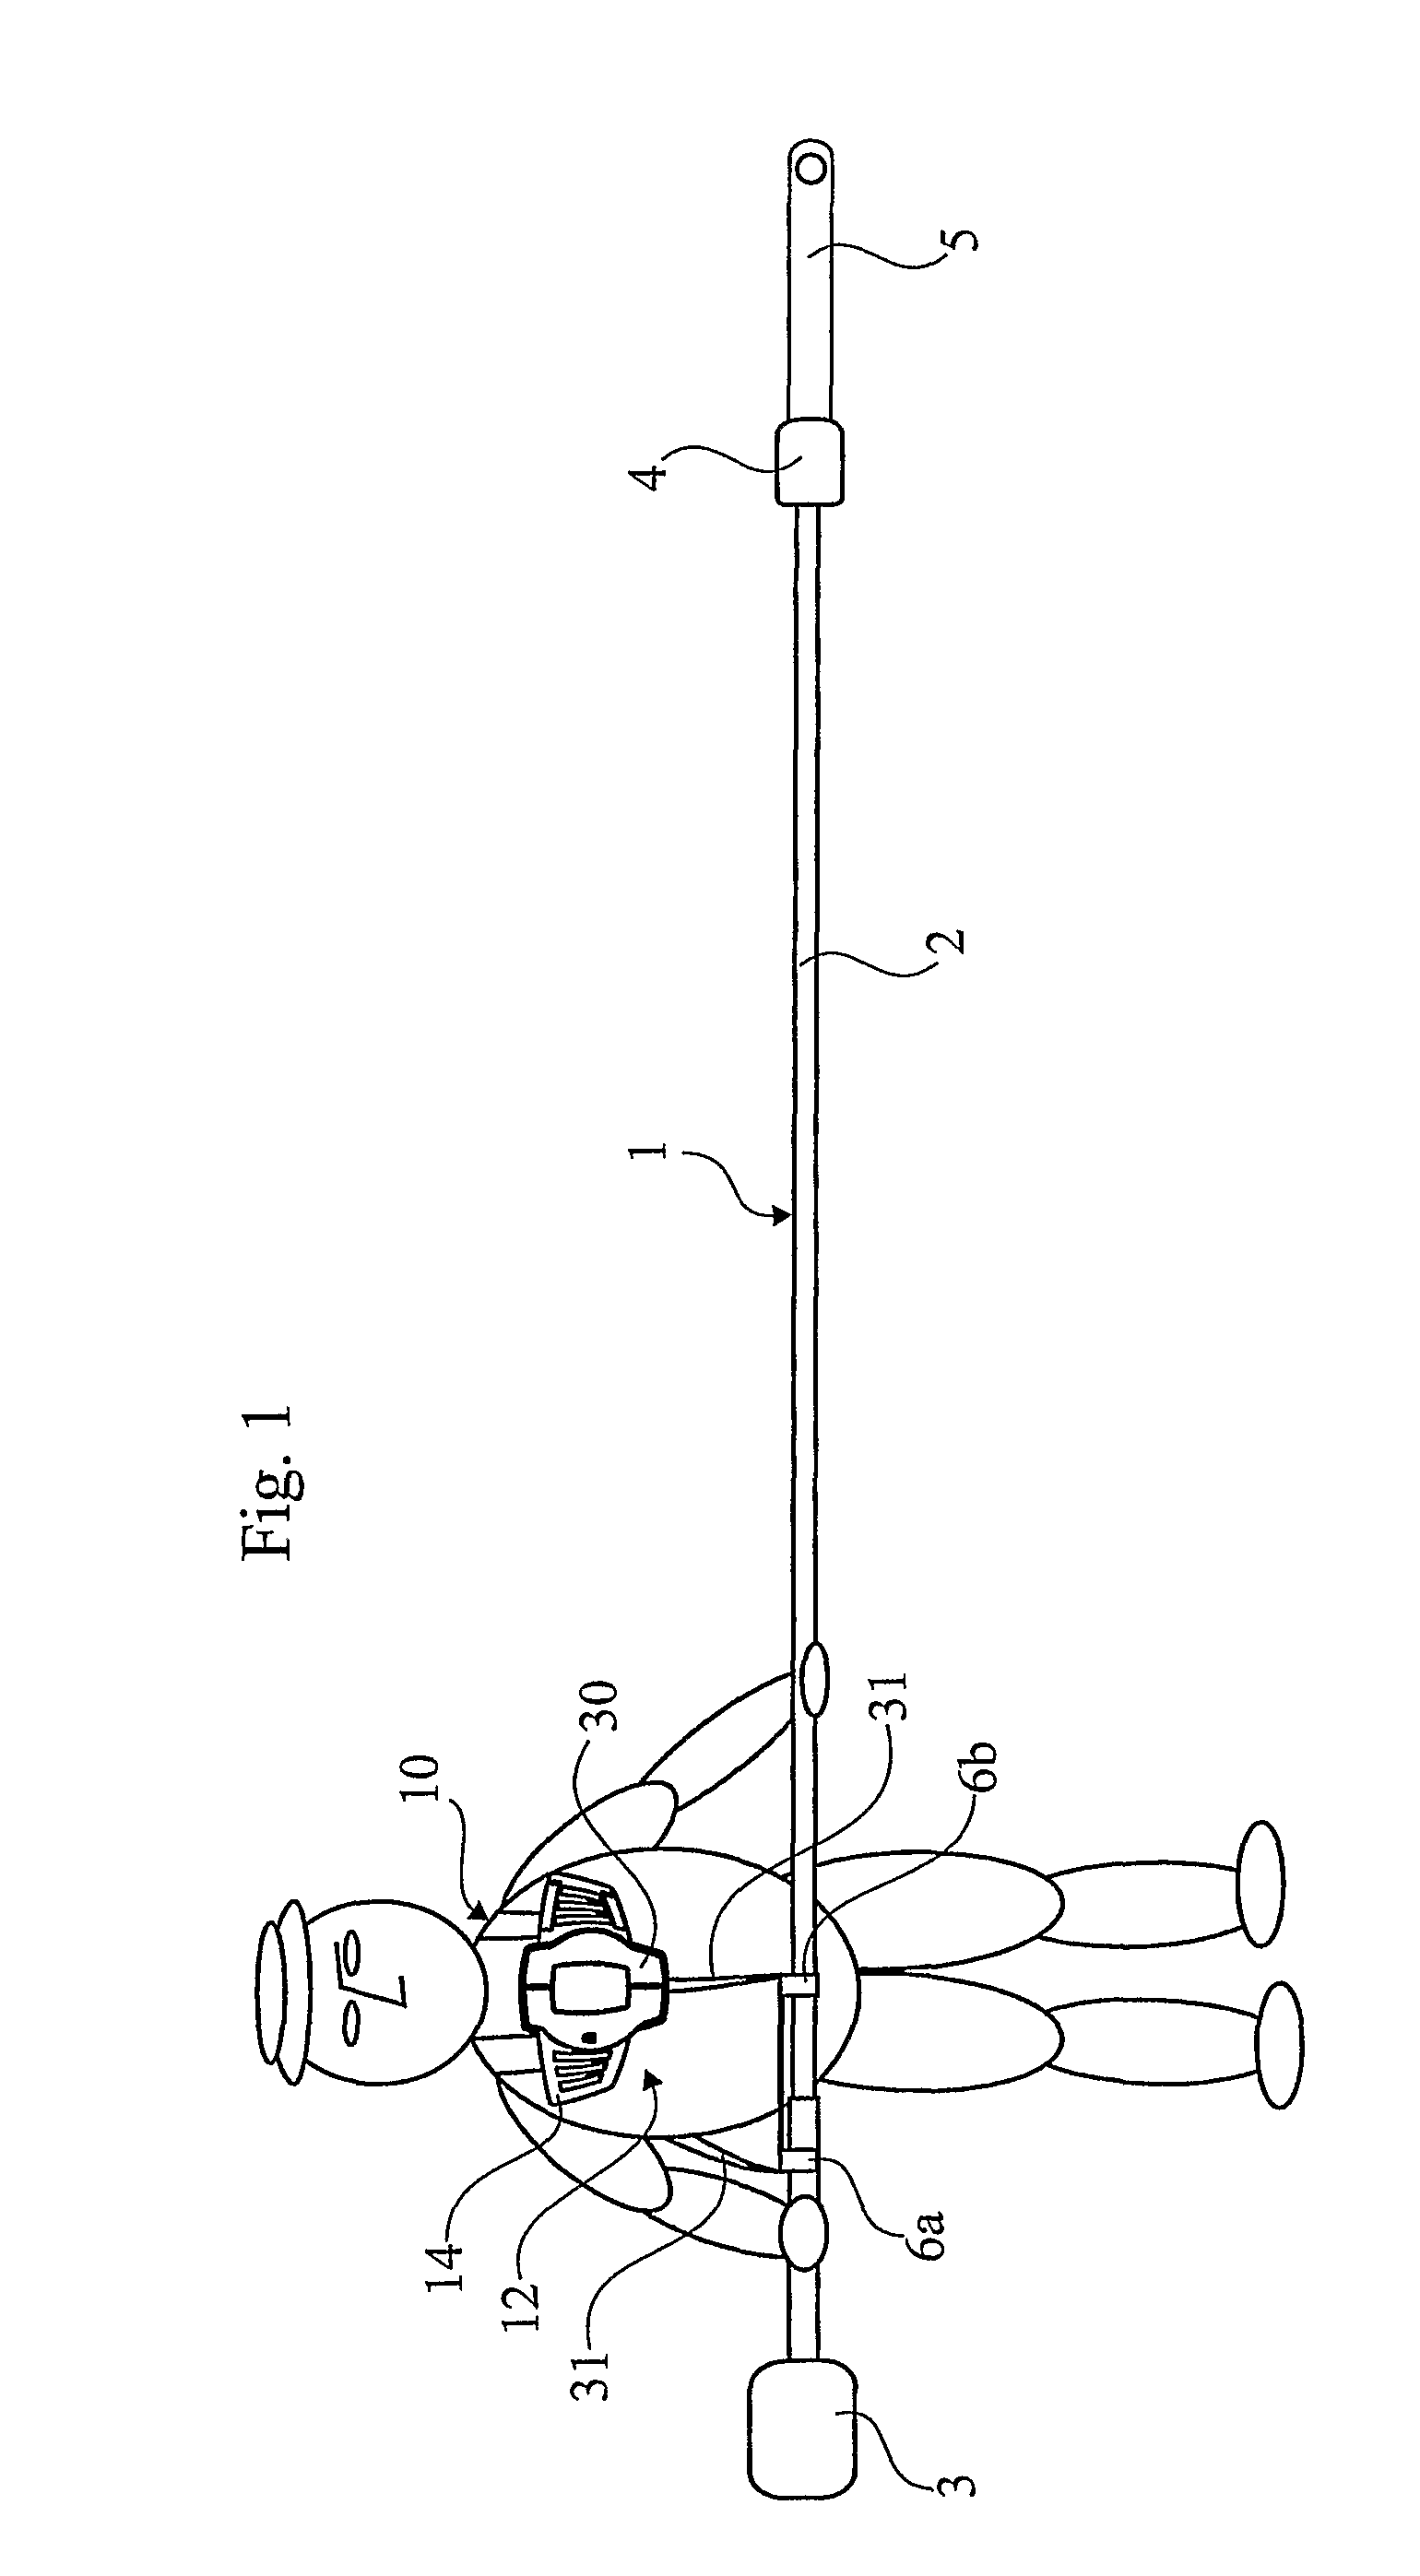 Harness for power tool having a pole